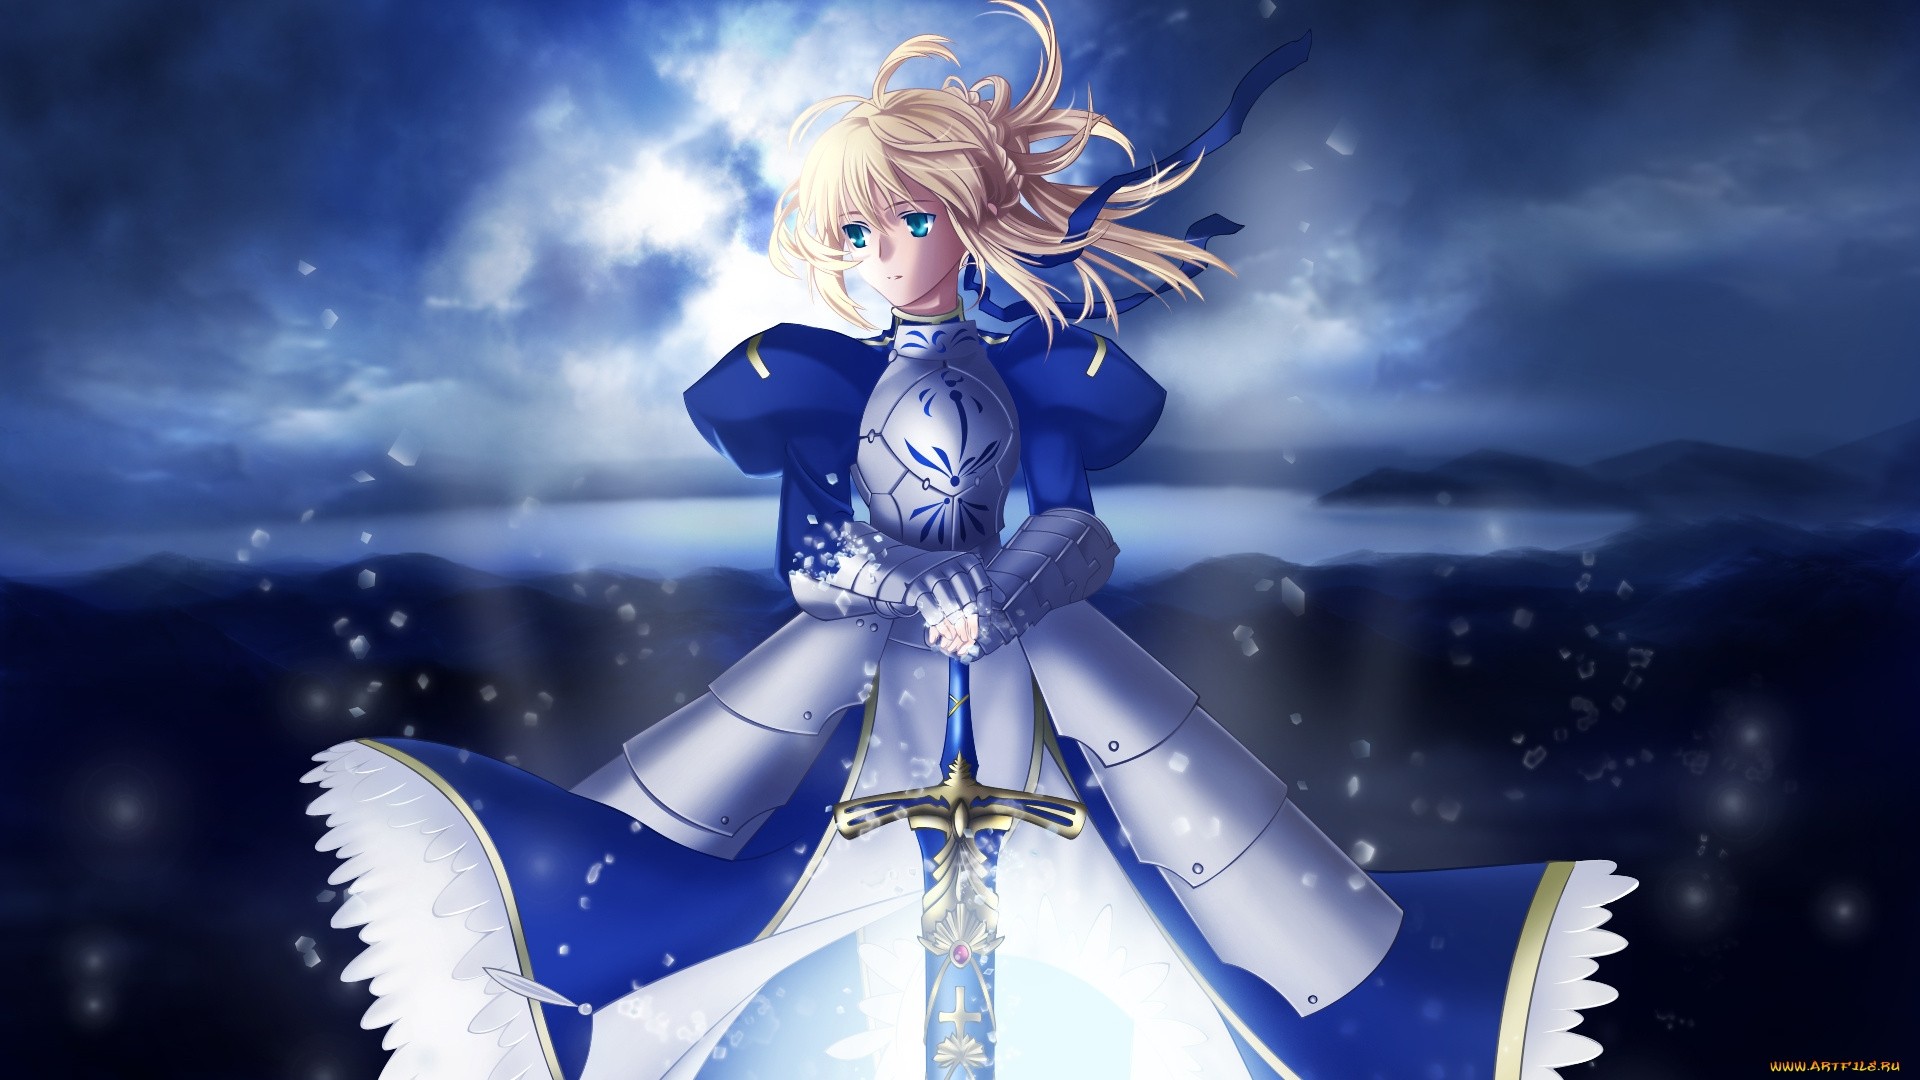 Fate Stay Night Saber Wallpaper Free